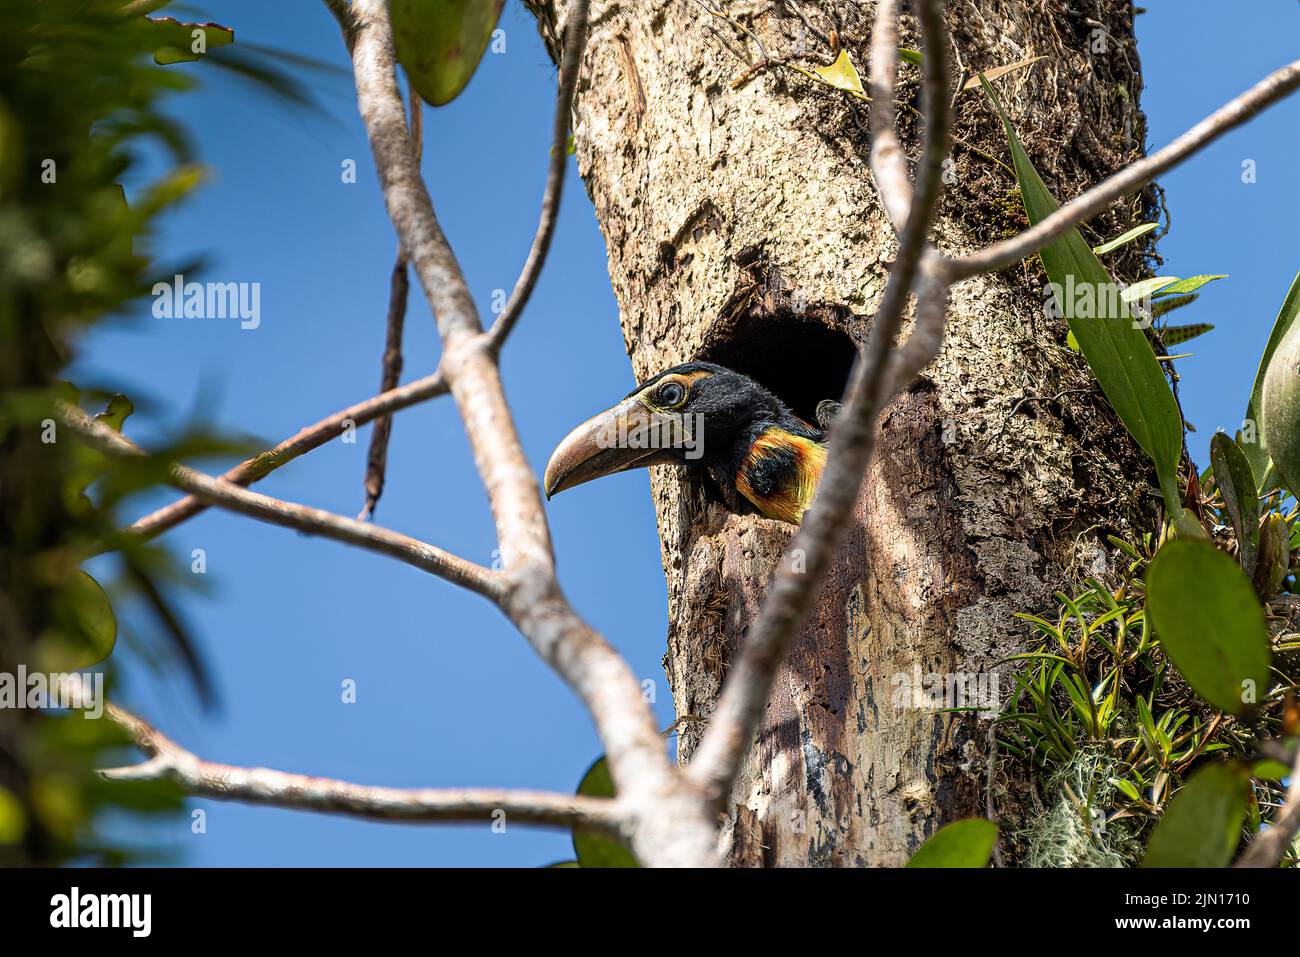 Collared aracari chick the young bird with new feathers looking out of his nest a hole high up in a tree Stock Photo